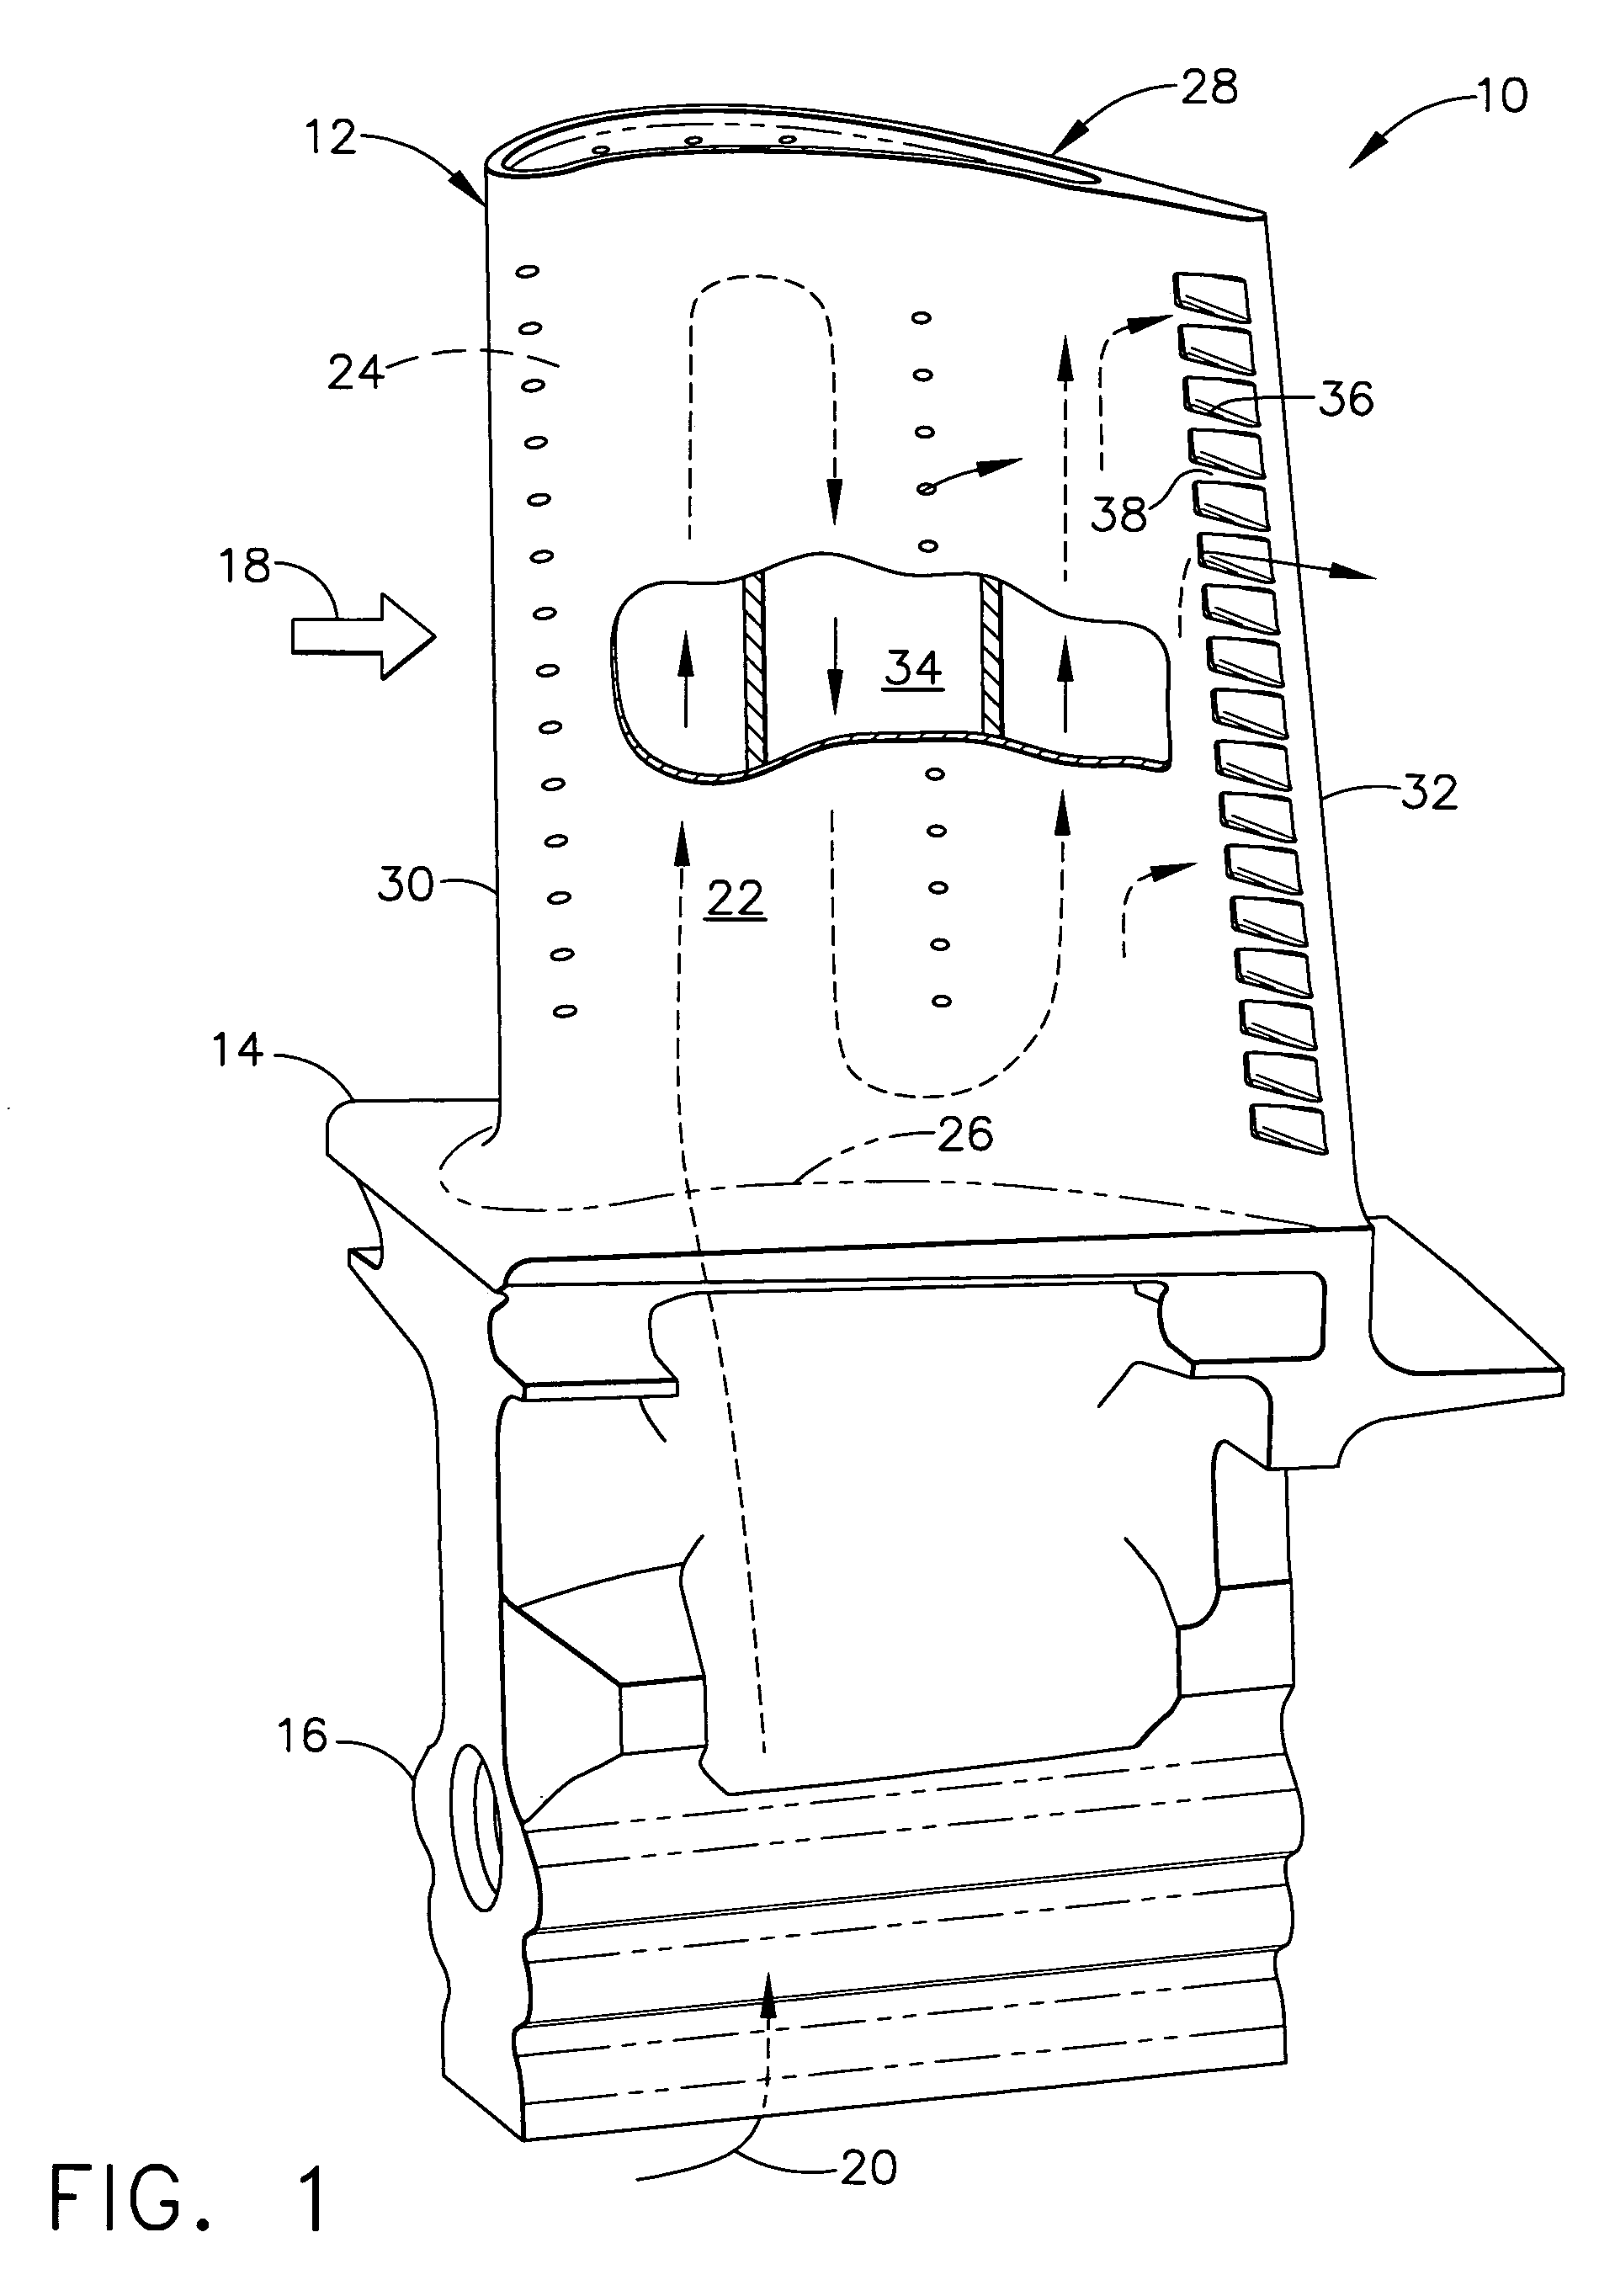 Stepped outlet turbine airfoil